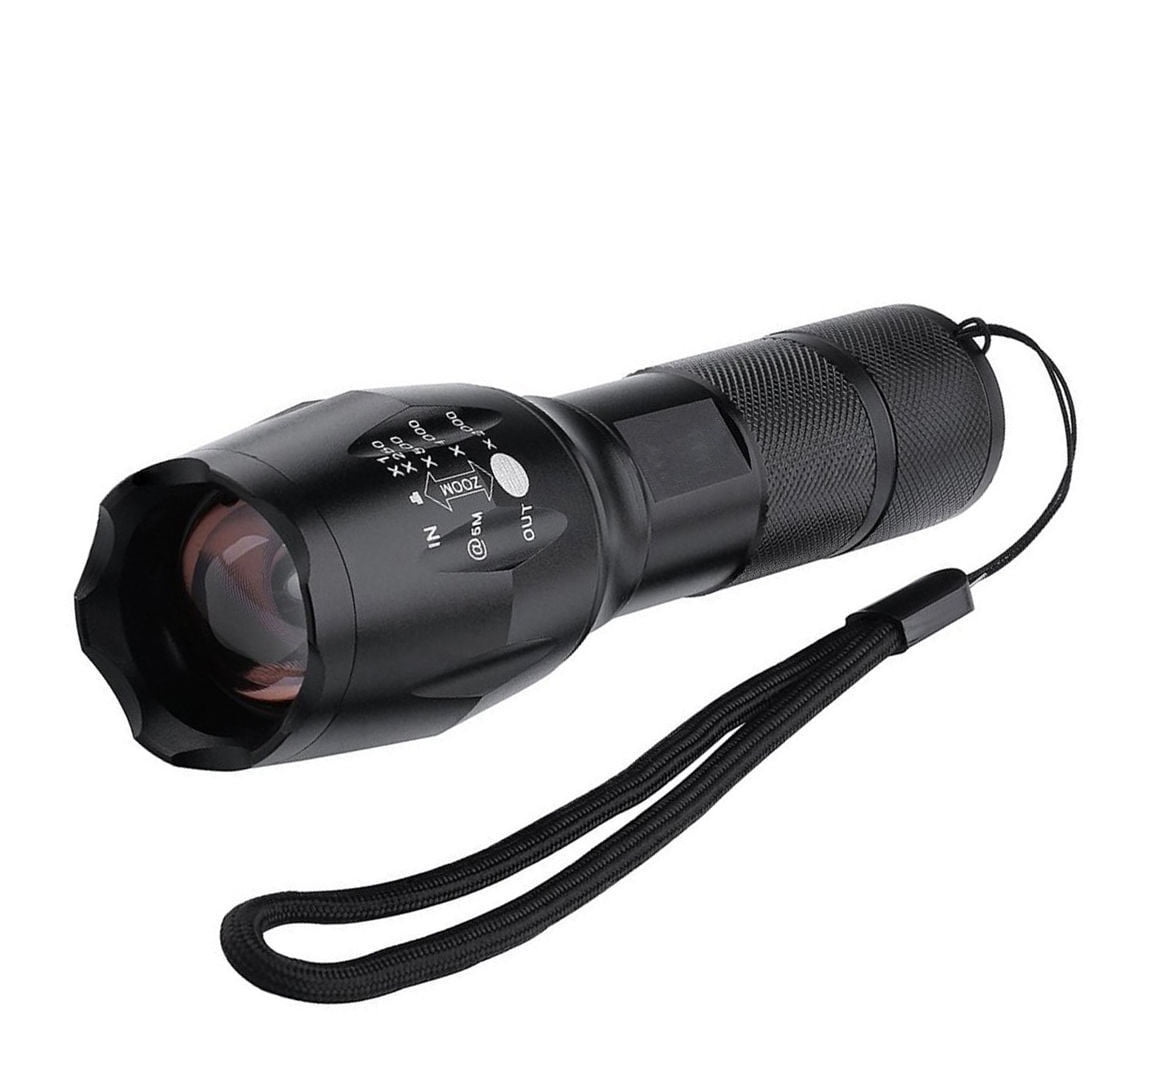 Waterproof Tactical Pocket Sized Flashlight Military LED Torch Flashlight Lamps 